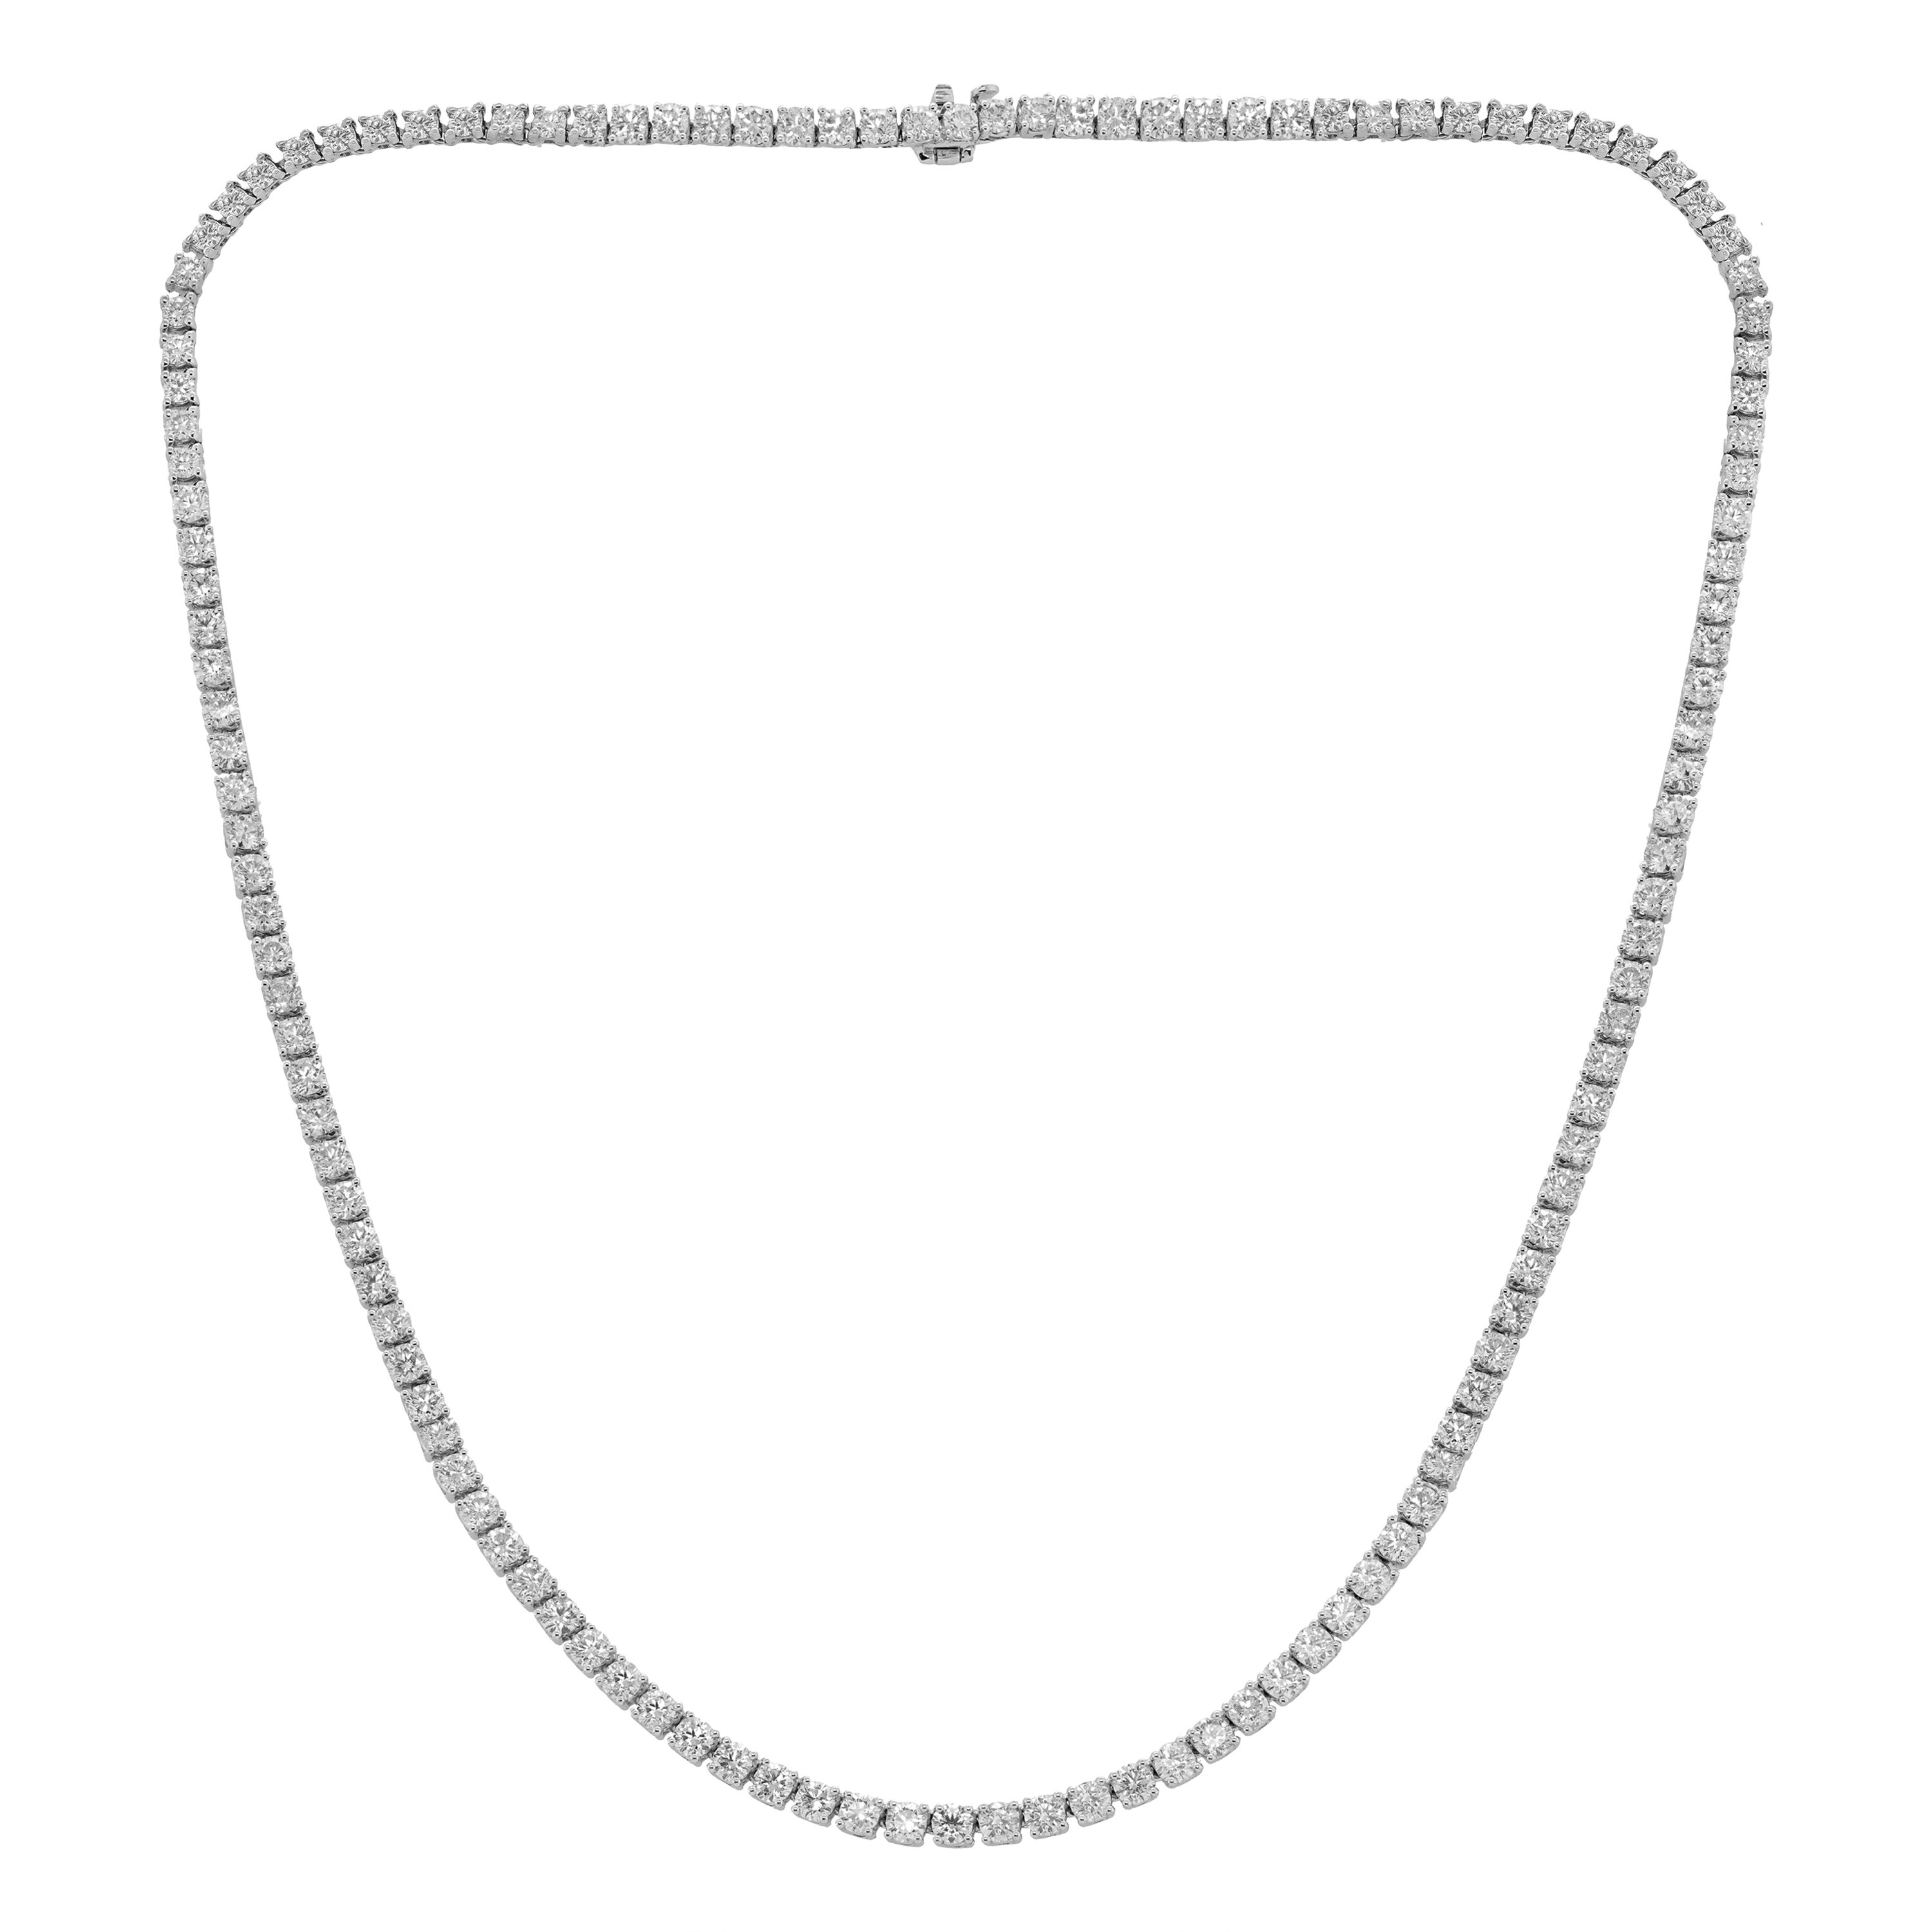 Diana M. Custom 12.05 cts Round 4 Prong Diamond 14k White Gold Tennis Necklace  For Sale